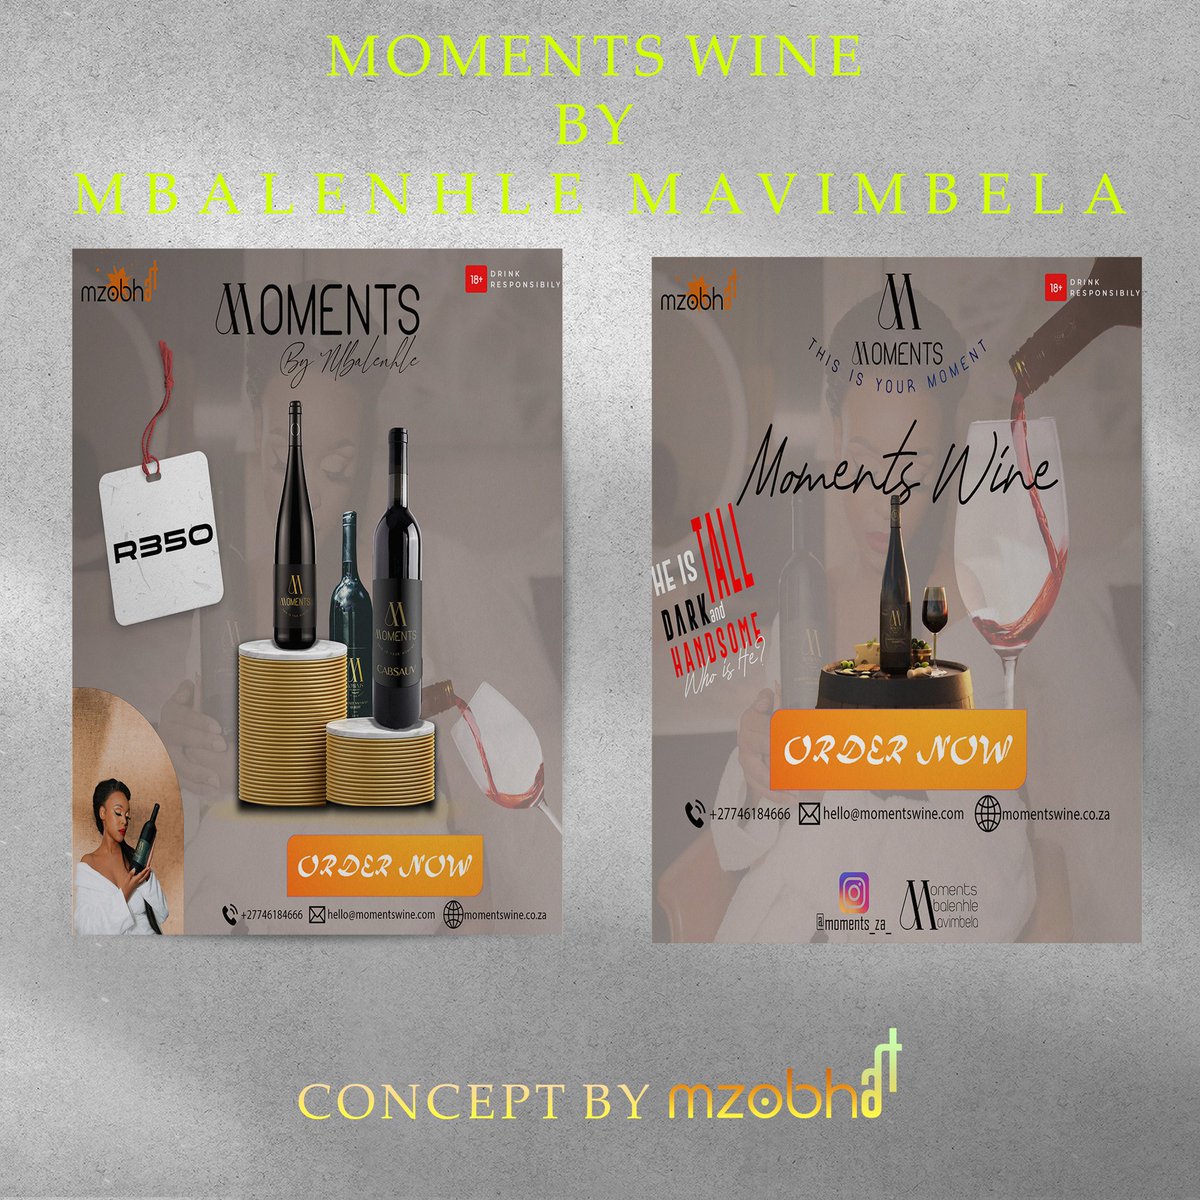 Another one for uSisi we 'Crumbs'  @MbalenhleMavim 😂😂🔥@Moments_ZA_
-🍷Moments Wine🍷Concept-

I swear I'm obsessed with designing these😫😅🤞🏾

Get your own advert. poster, designed by #MzobhART😌

#MomentsWine #WineLover #M3🍵 #graphicdesign #BlackExcellence #socialmediaposter